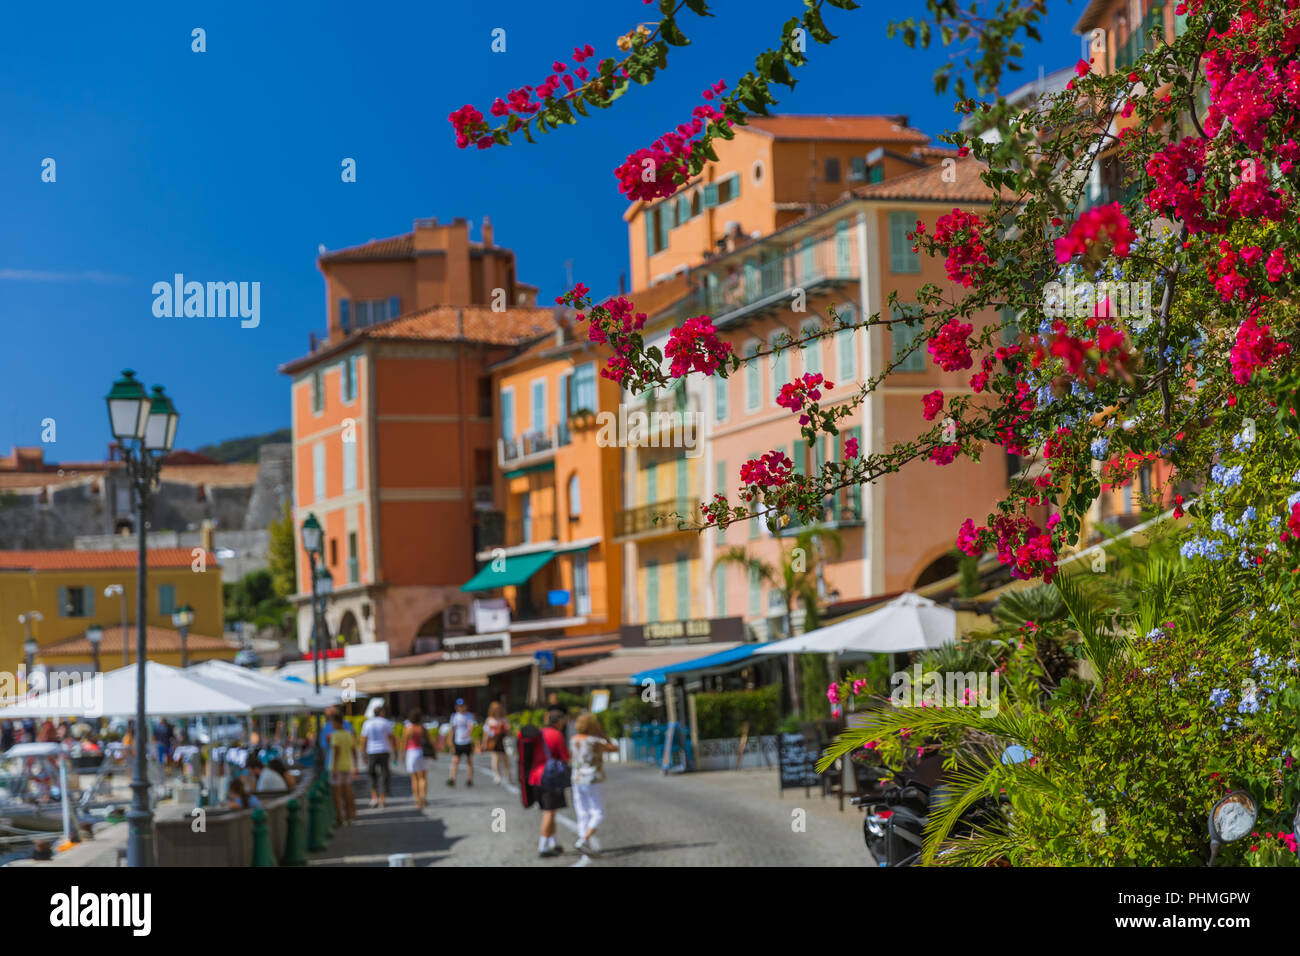 Villefranche-Sur-Mer in France Stock Photo